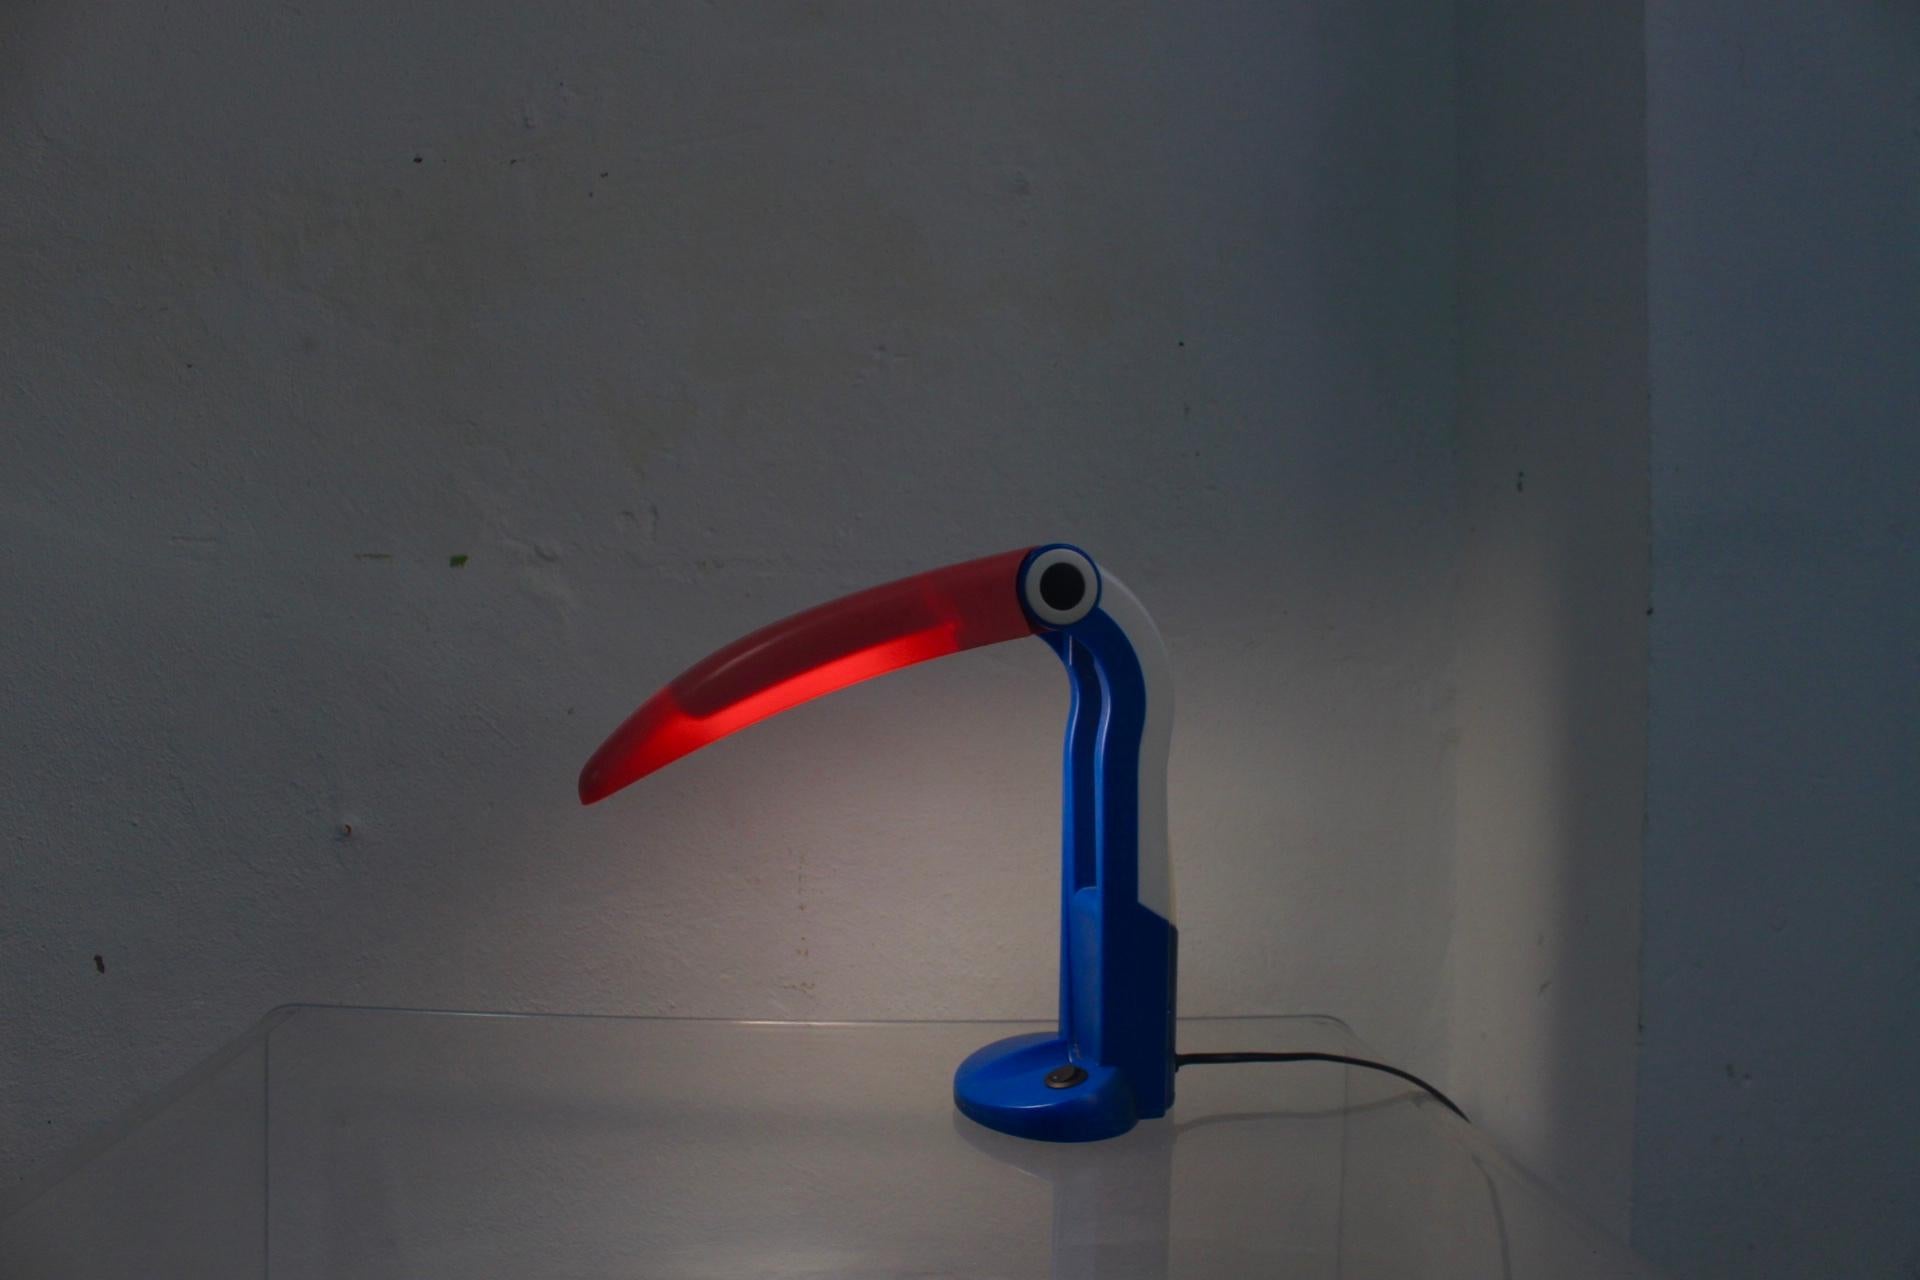 Toucan Blue & Pink Plastic Table Lamp by H.T Huang, 1980s  im Zustand „Gut“ im Angebot in Valencia, Valencia